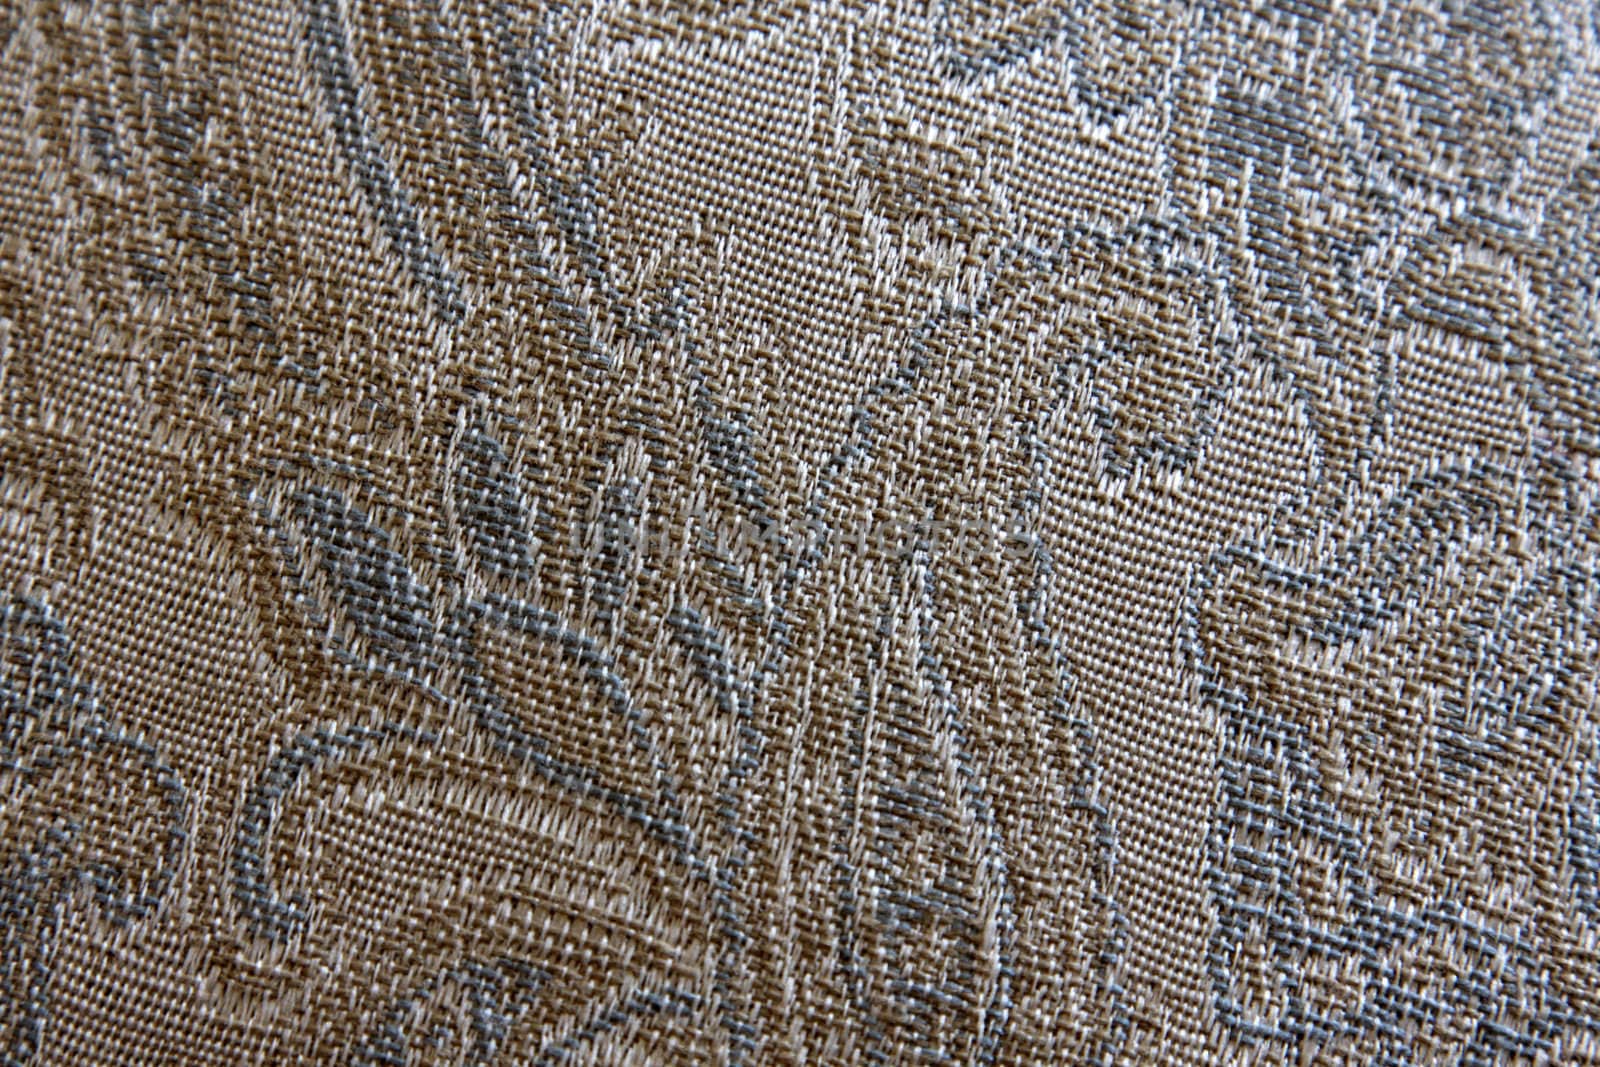 A close-up of the details of detailed cushion texture.
